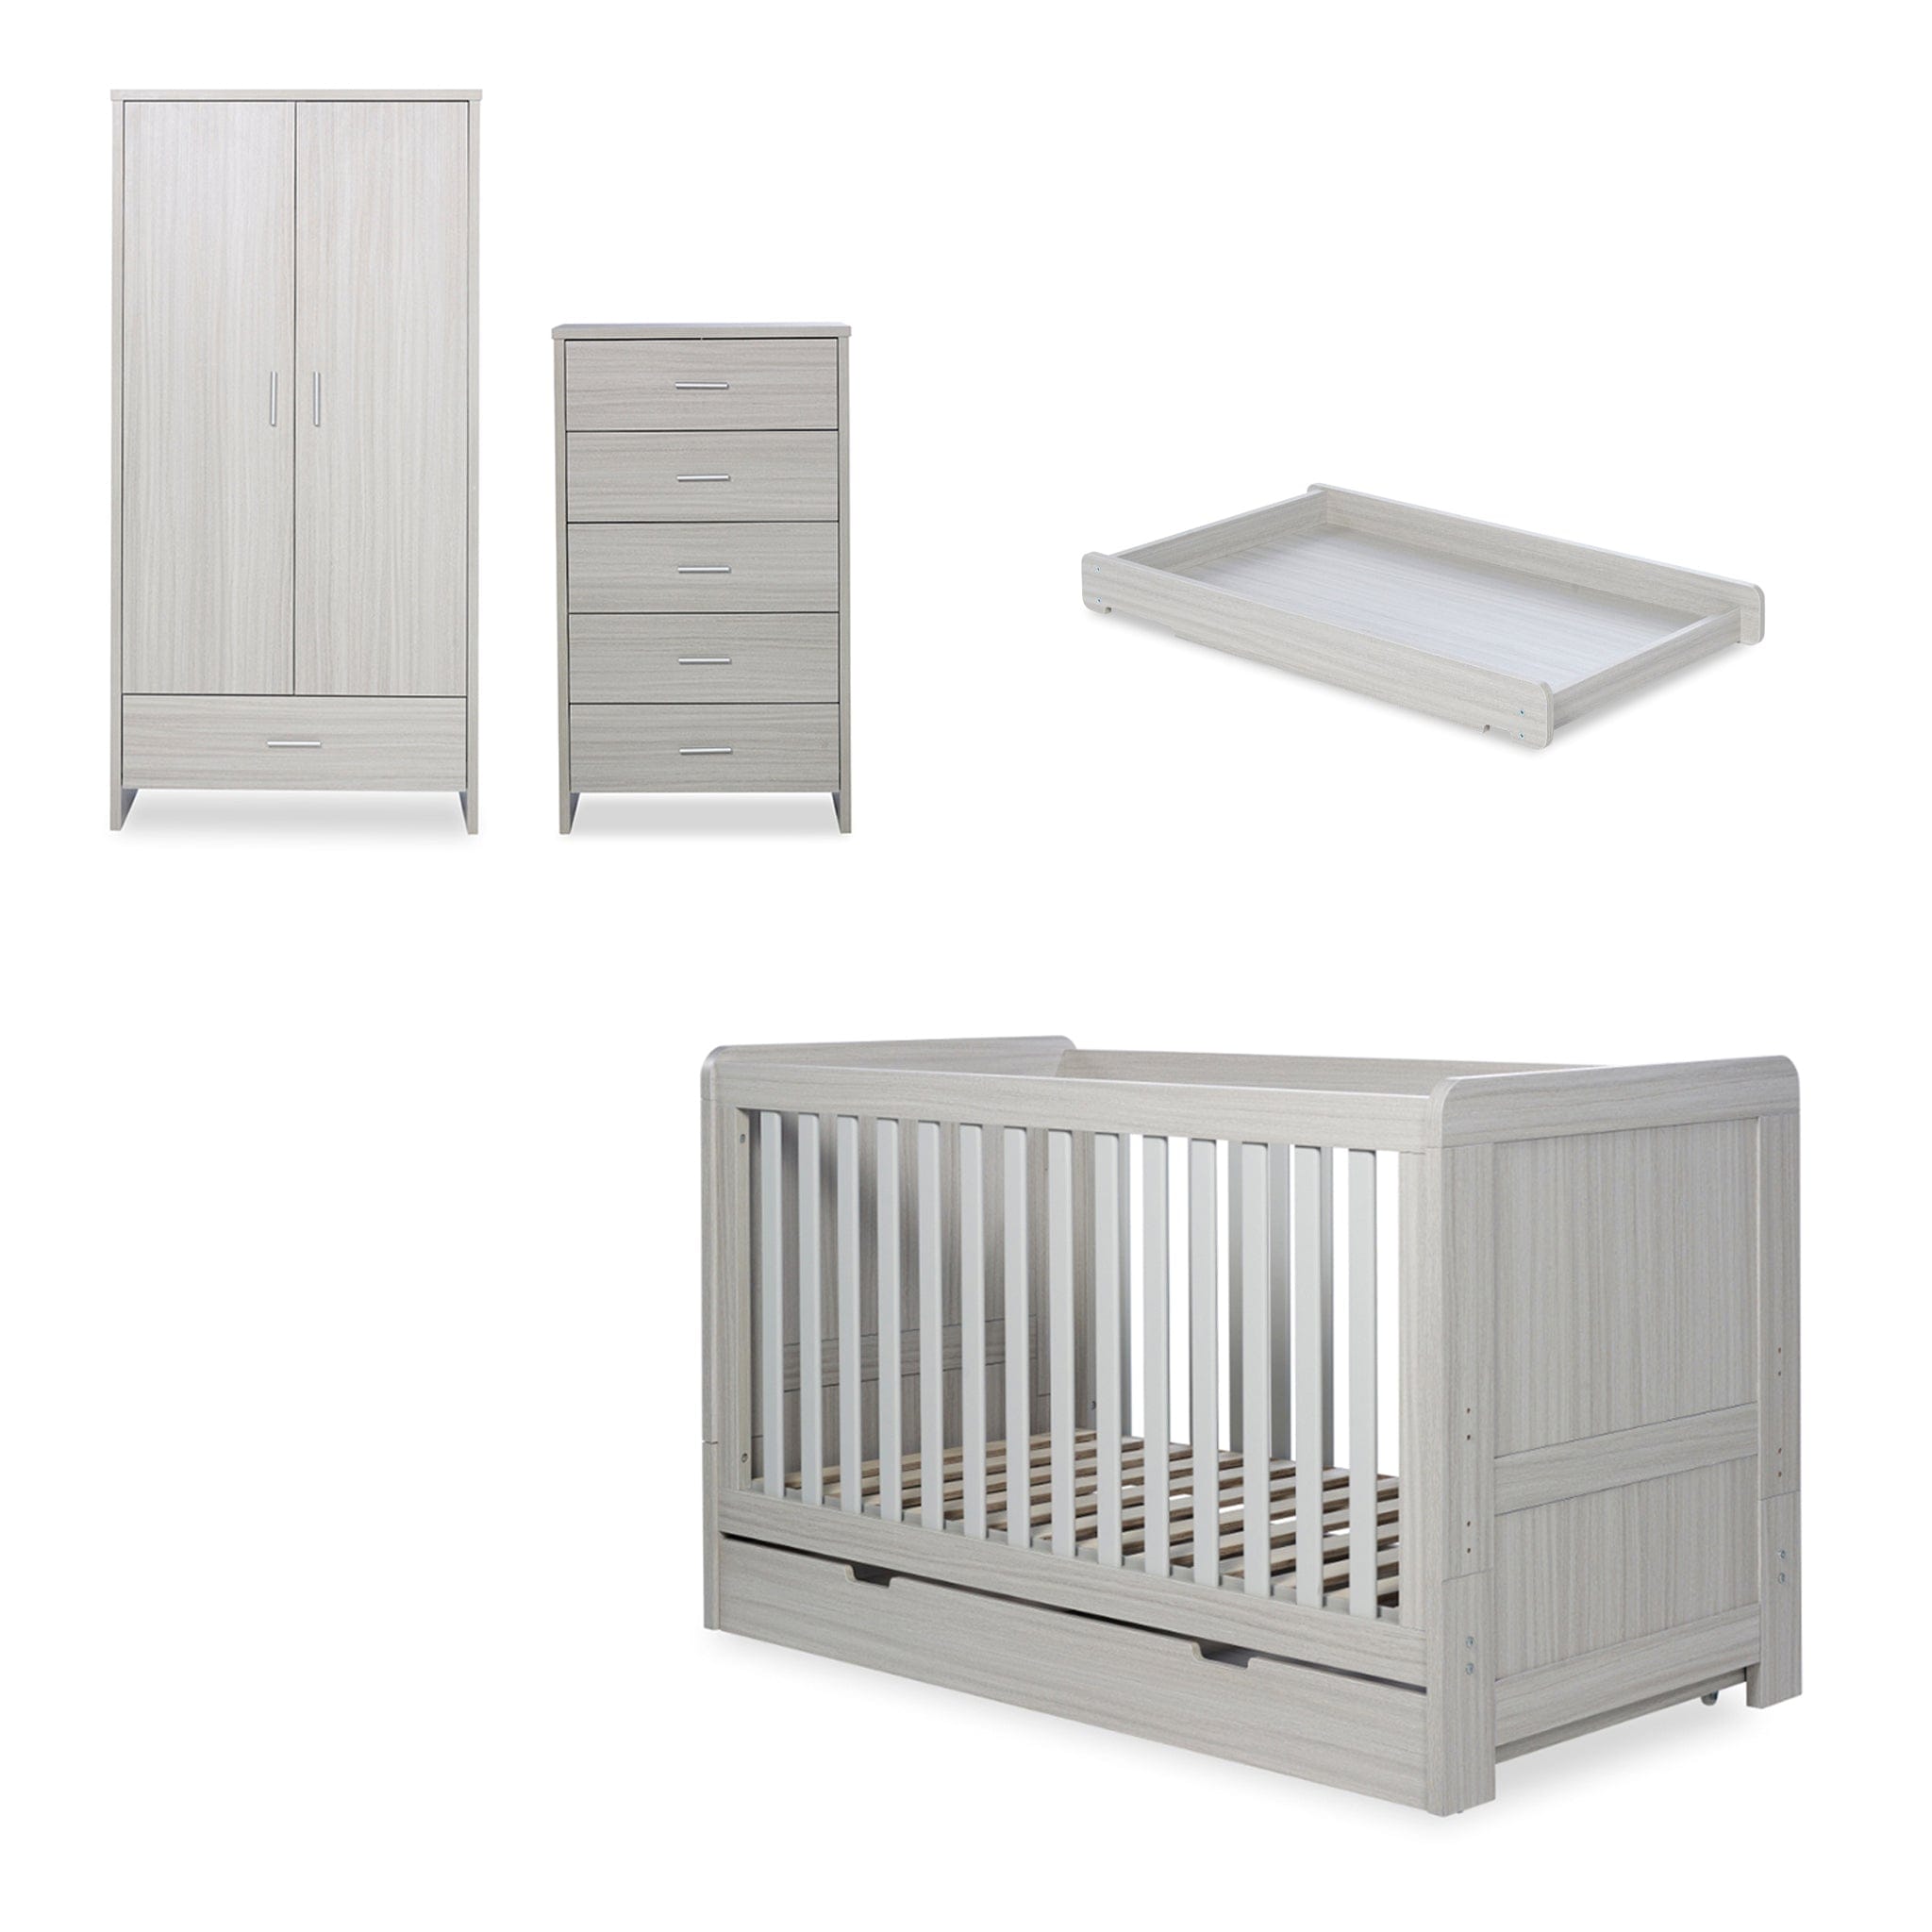 Ickle Bubba Nursery Room Sets Ickle Bubba Pembrey 4 Piece Furniture Set and Under Drawer Ash Grey